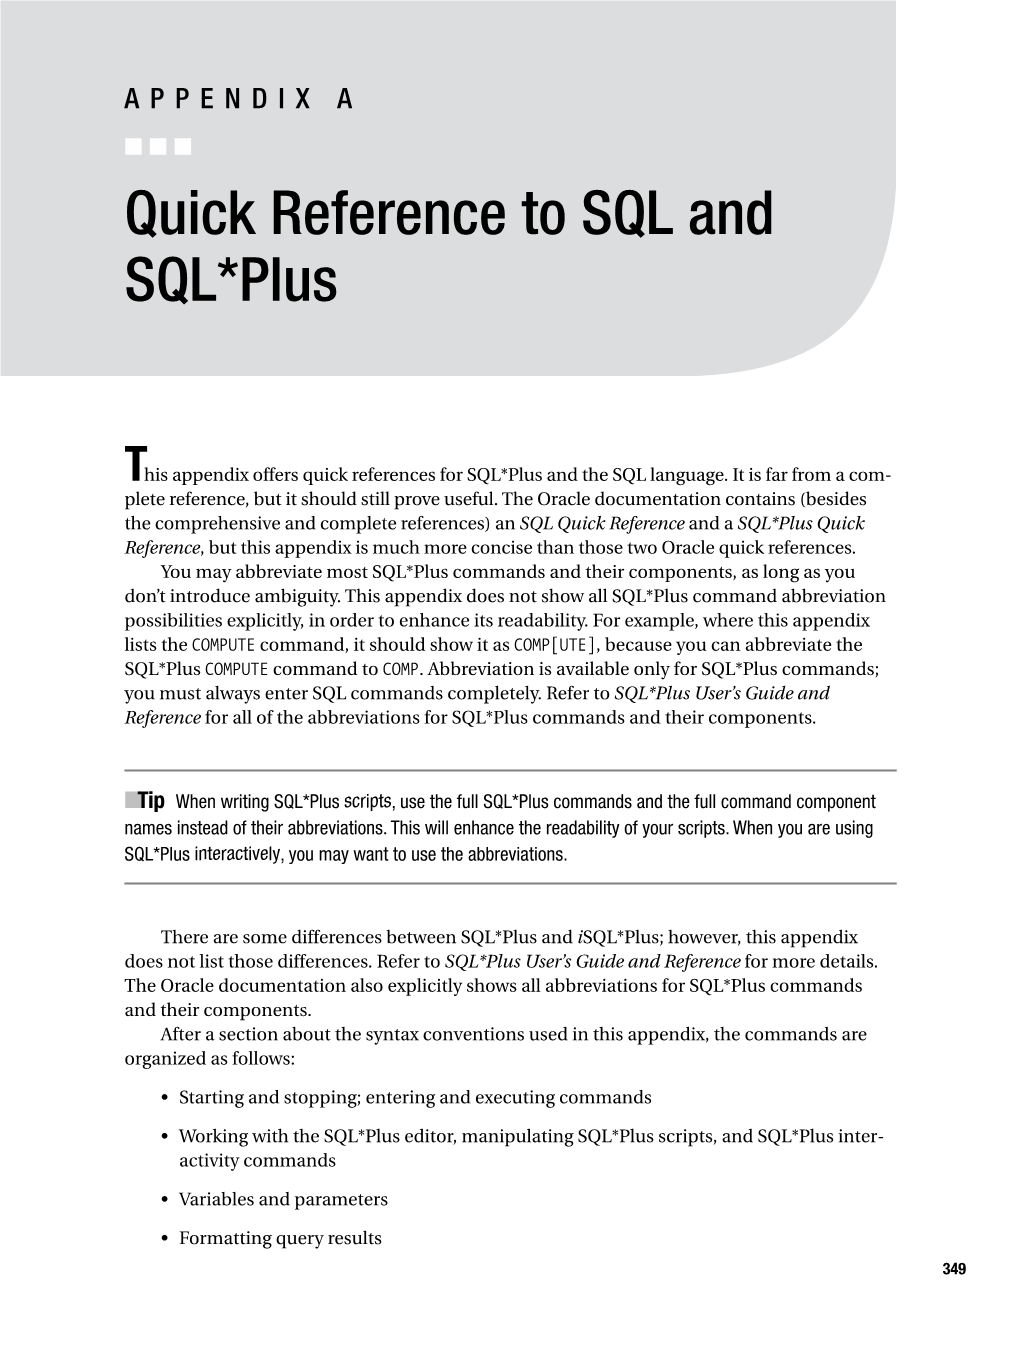 Quick Reference to SQL and SQL*Plus